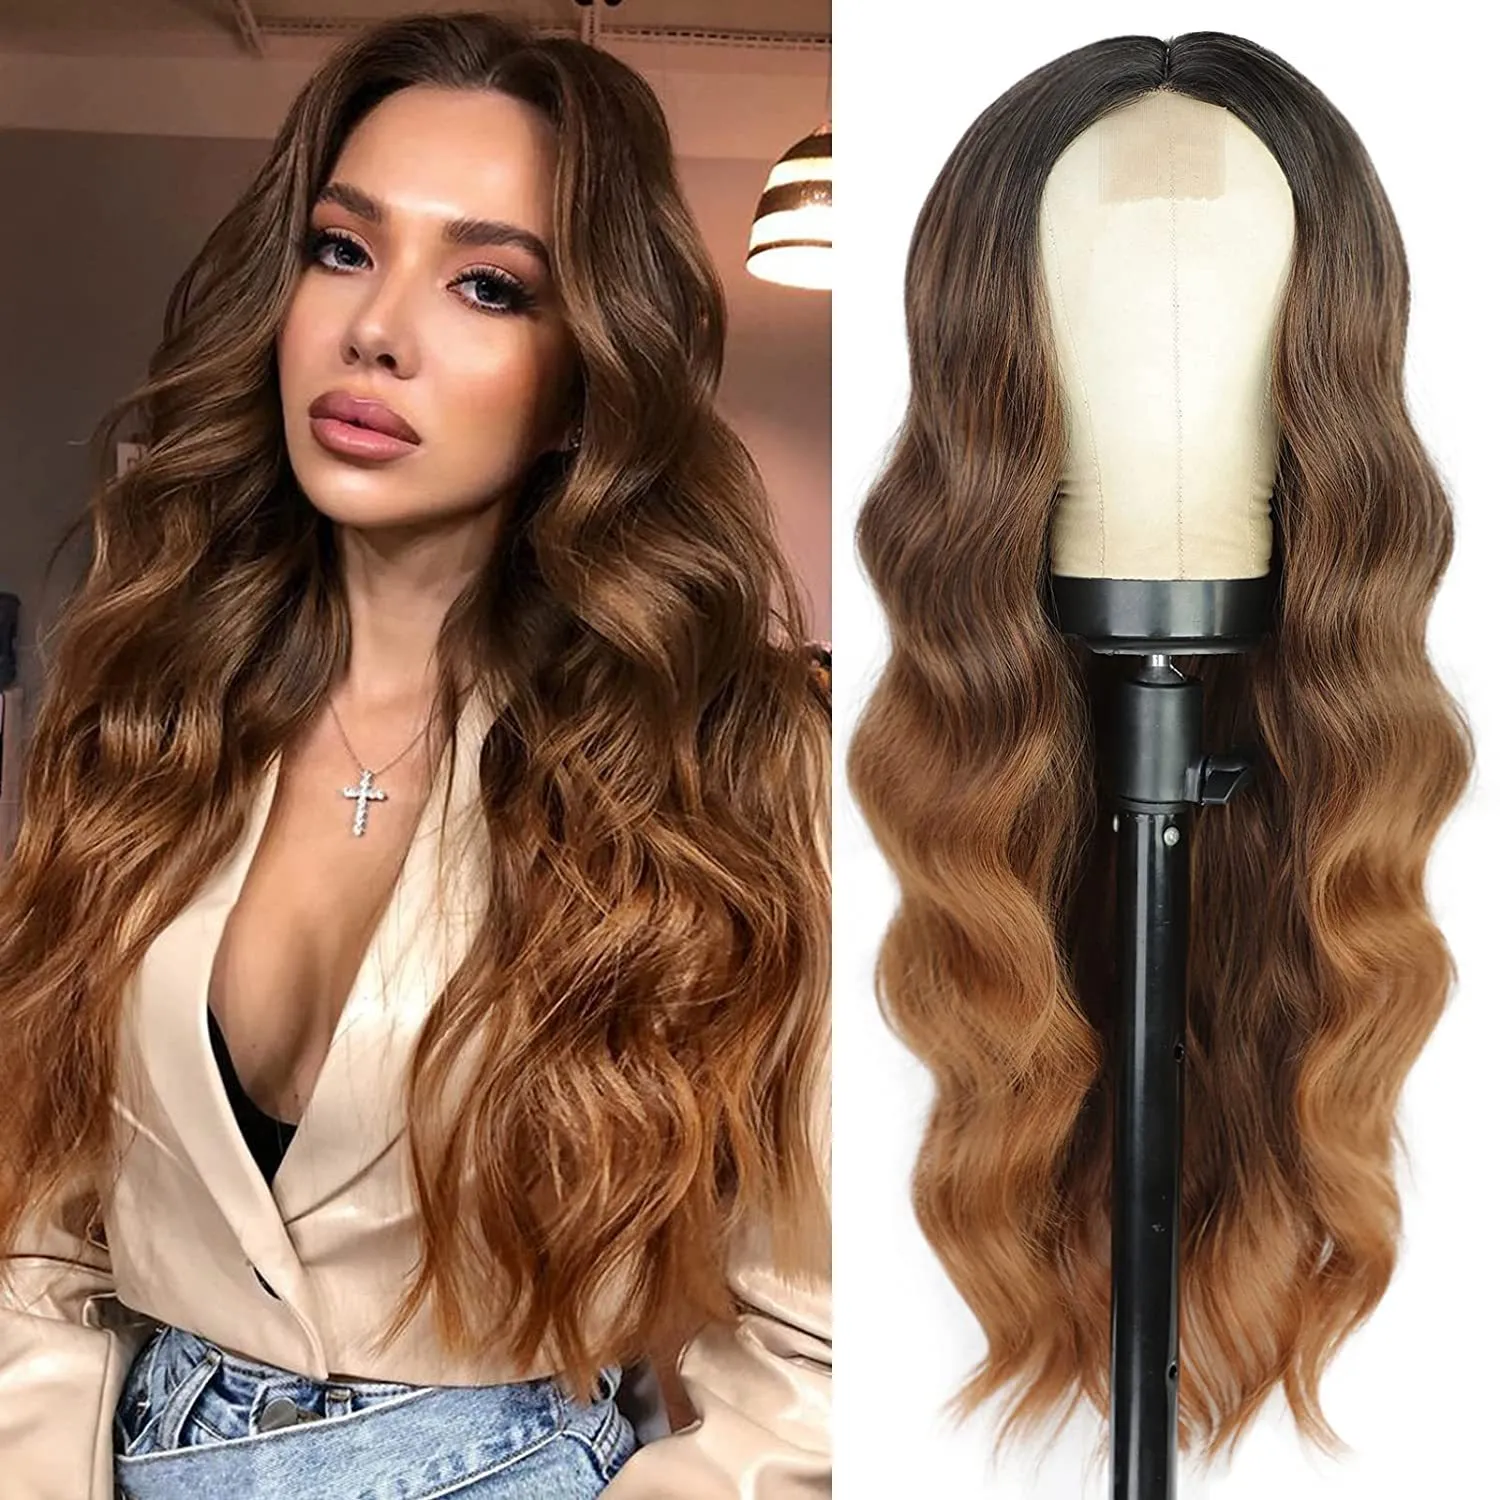 HD Body Wave Highlight Lace Front Human Hair Wigs For Women Lace Frontal Wig Pre Plucked Honey Blonde Colored Synthetic Wigs Hair fast ship